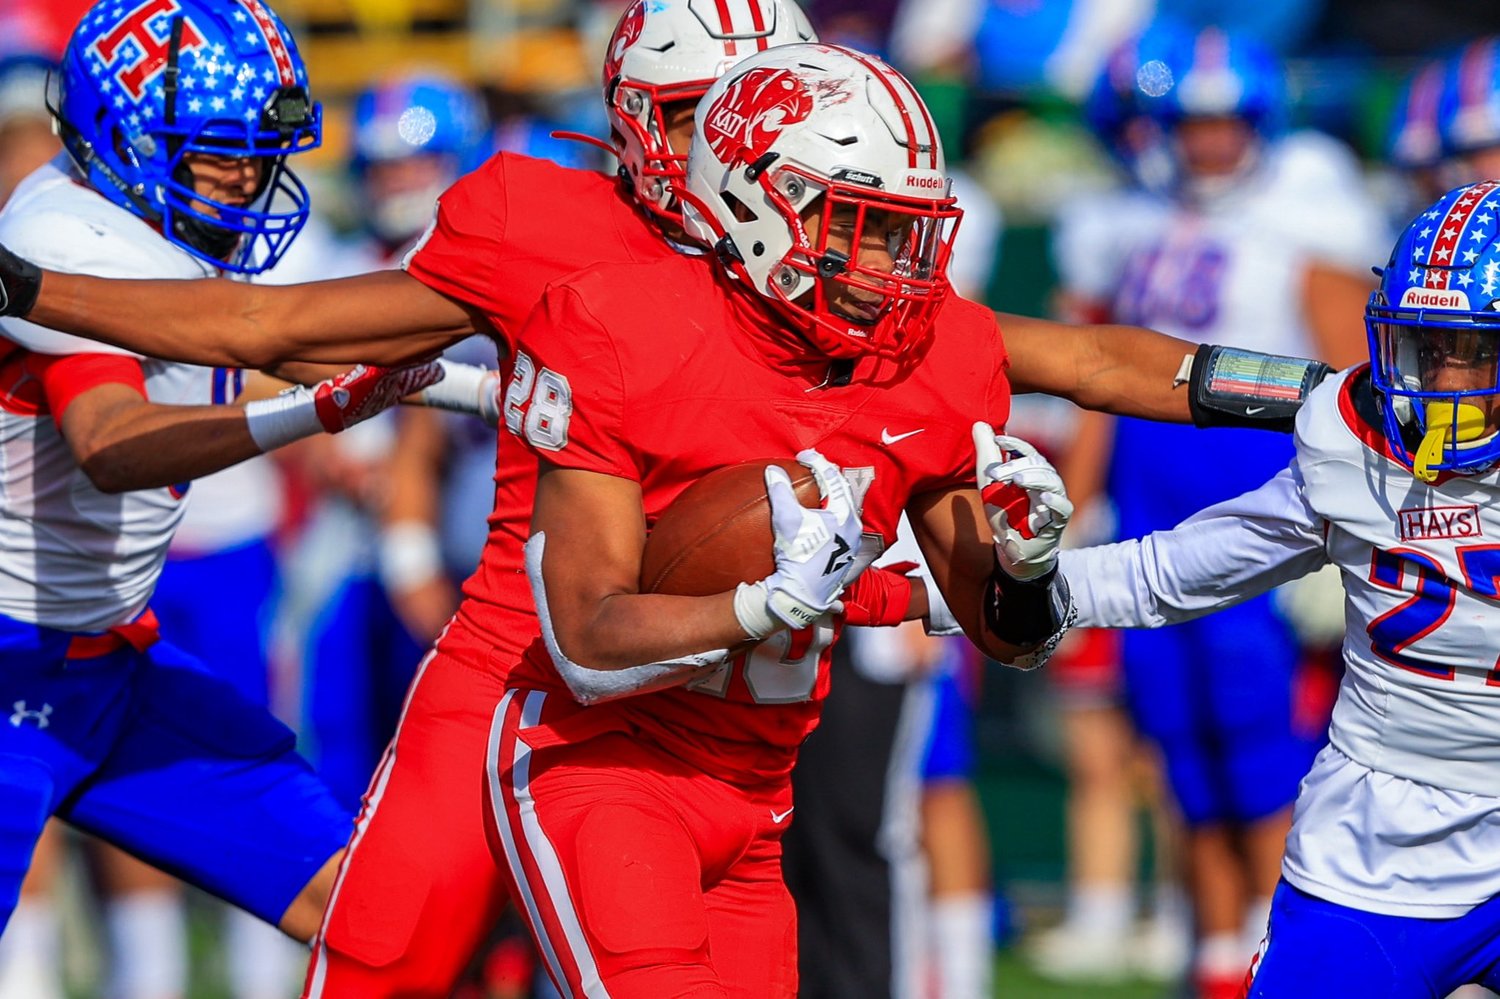 Katy High senior running back Jalen Davis (28) carries the ball during the Tigers’ Class 6A-Division II state semifinal game against Buda Hays on Jan. 9 at McLane Stadium in Waco. Davis verbally committed last week to continue his football career at Stephen F. Austin.